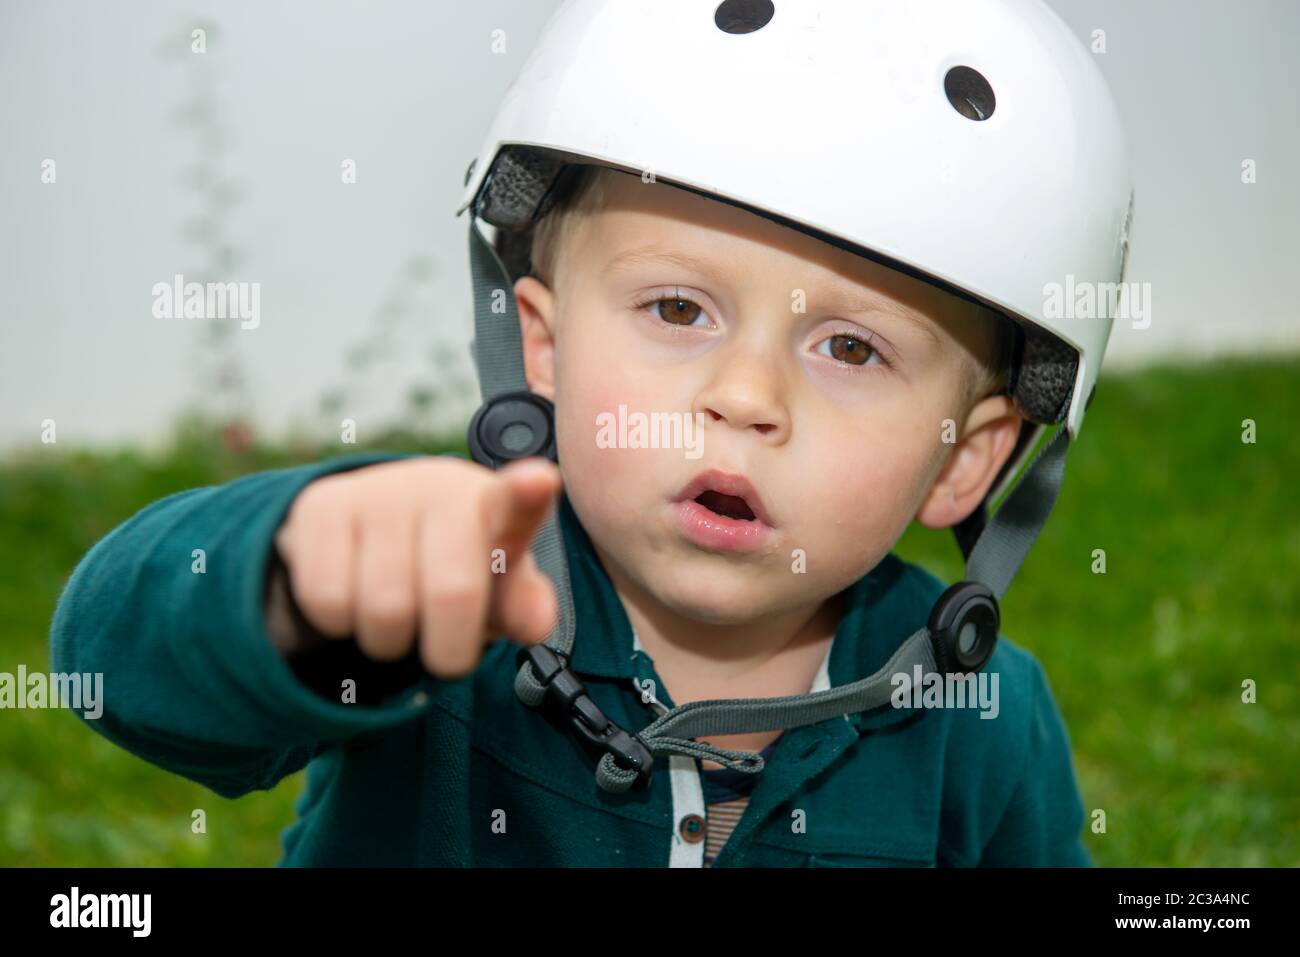 portrait of young boy with white helmet Stock Photo